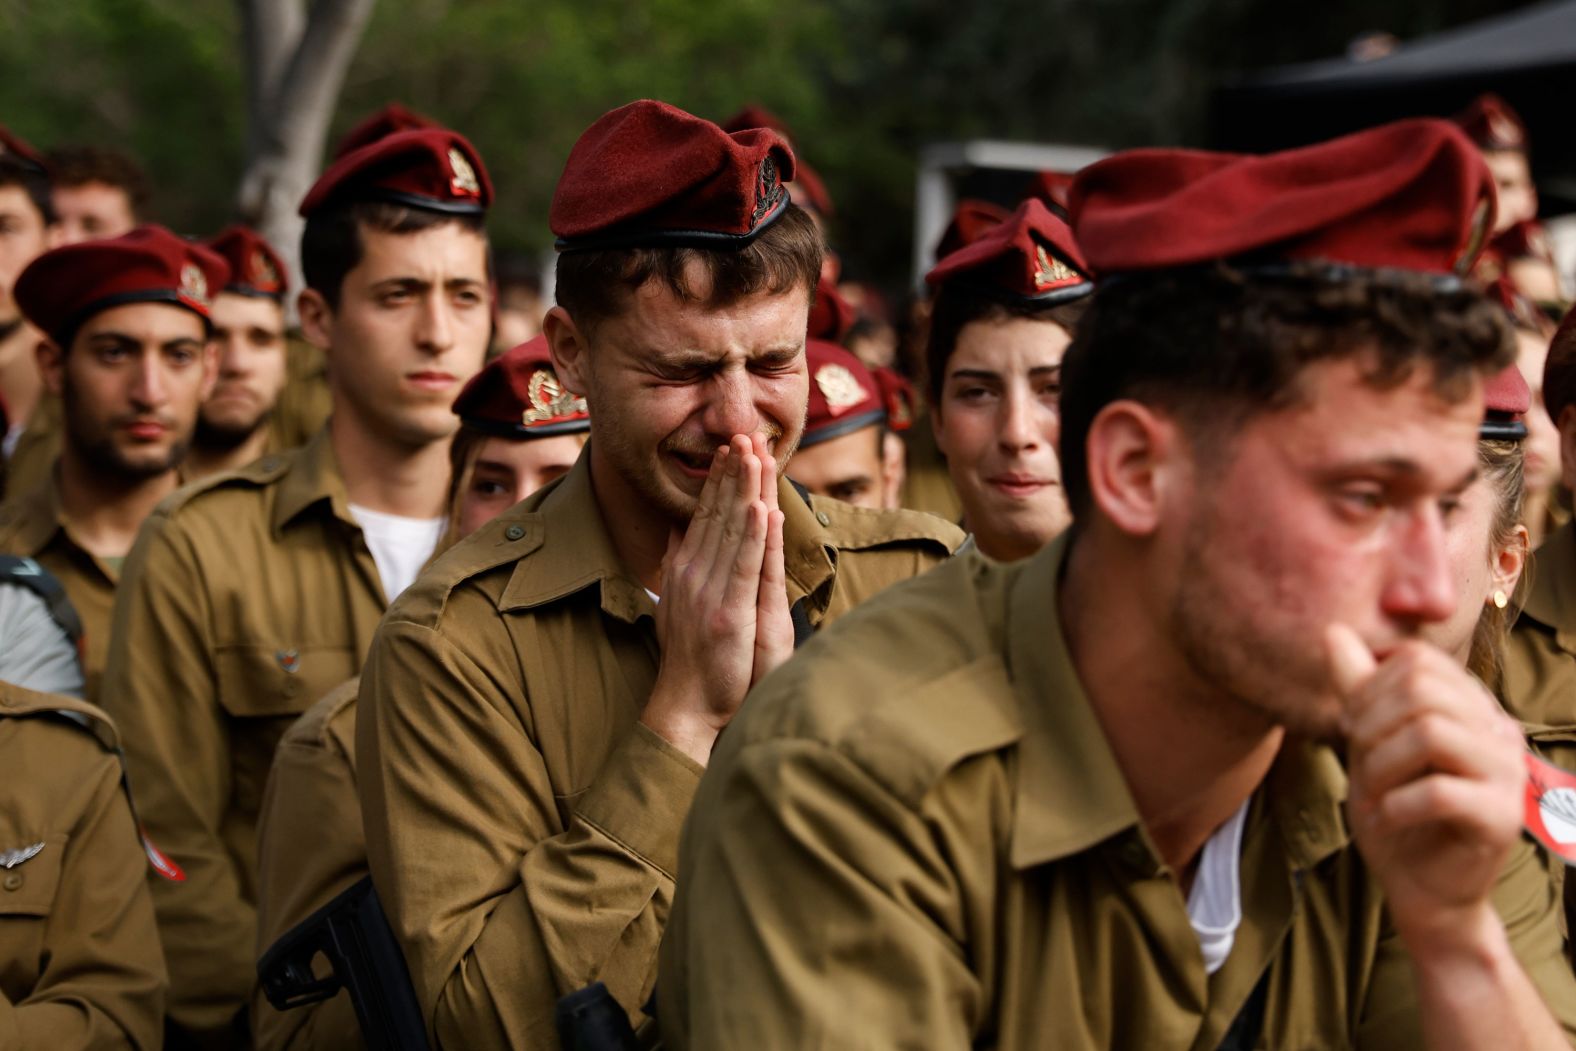 Israeli soldiers attend a funeral for Staff Sgt. David Sasson in Netanya, Israel, on Thursday, March 7. The Israel Defense Force announced a day earlier that Sasson, 21, had been killed while fighting in southern Gaza. Israel launched its military offensive in Gaza after the militant group Hamas killed at least 1,200 people and kidnapped more than 250 others in southern Israel on October 7.